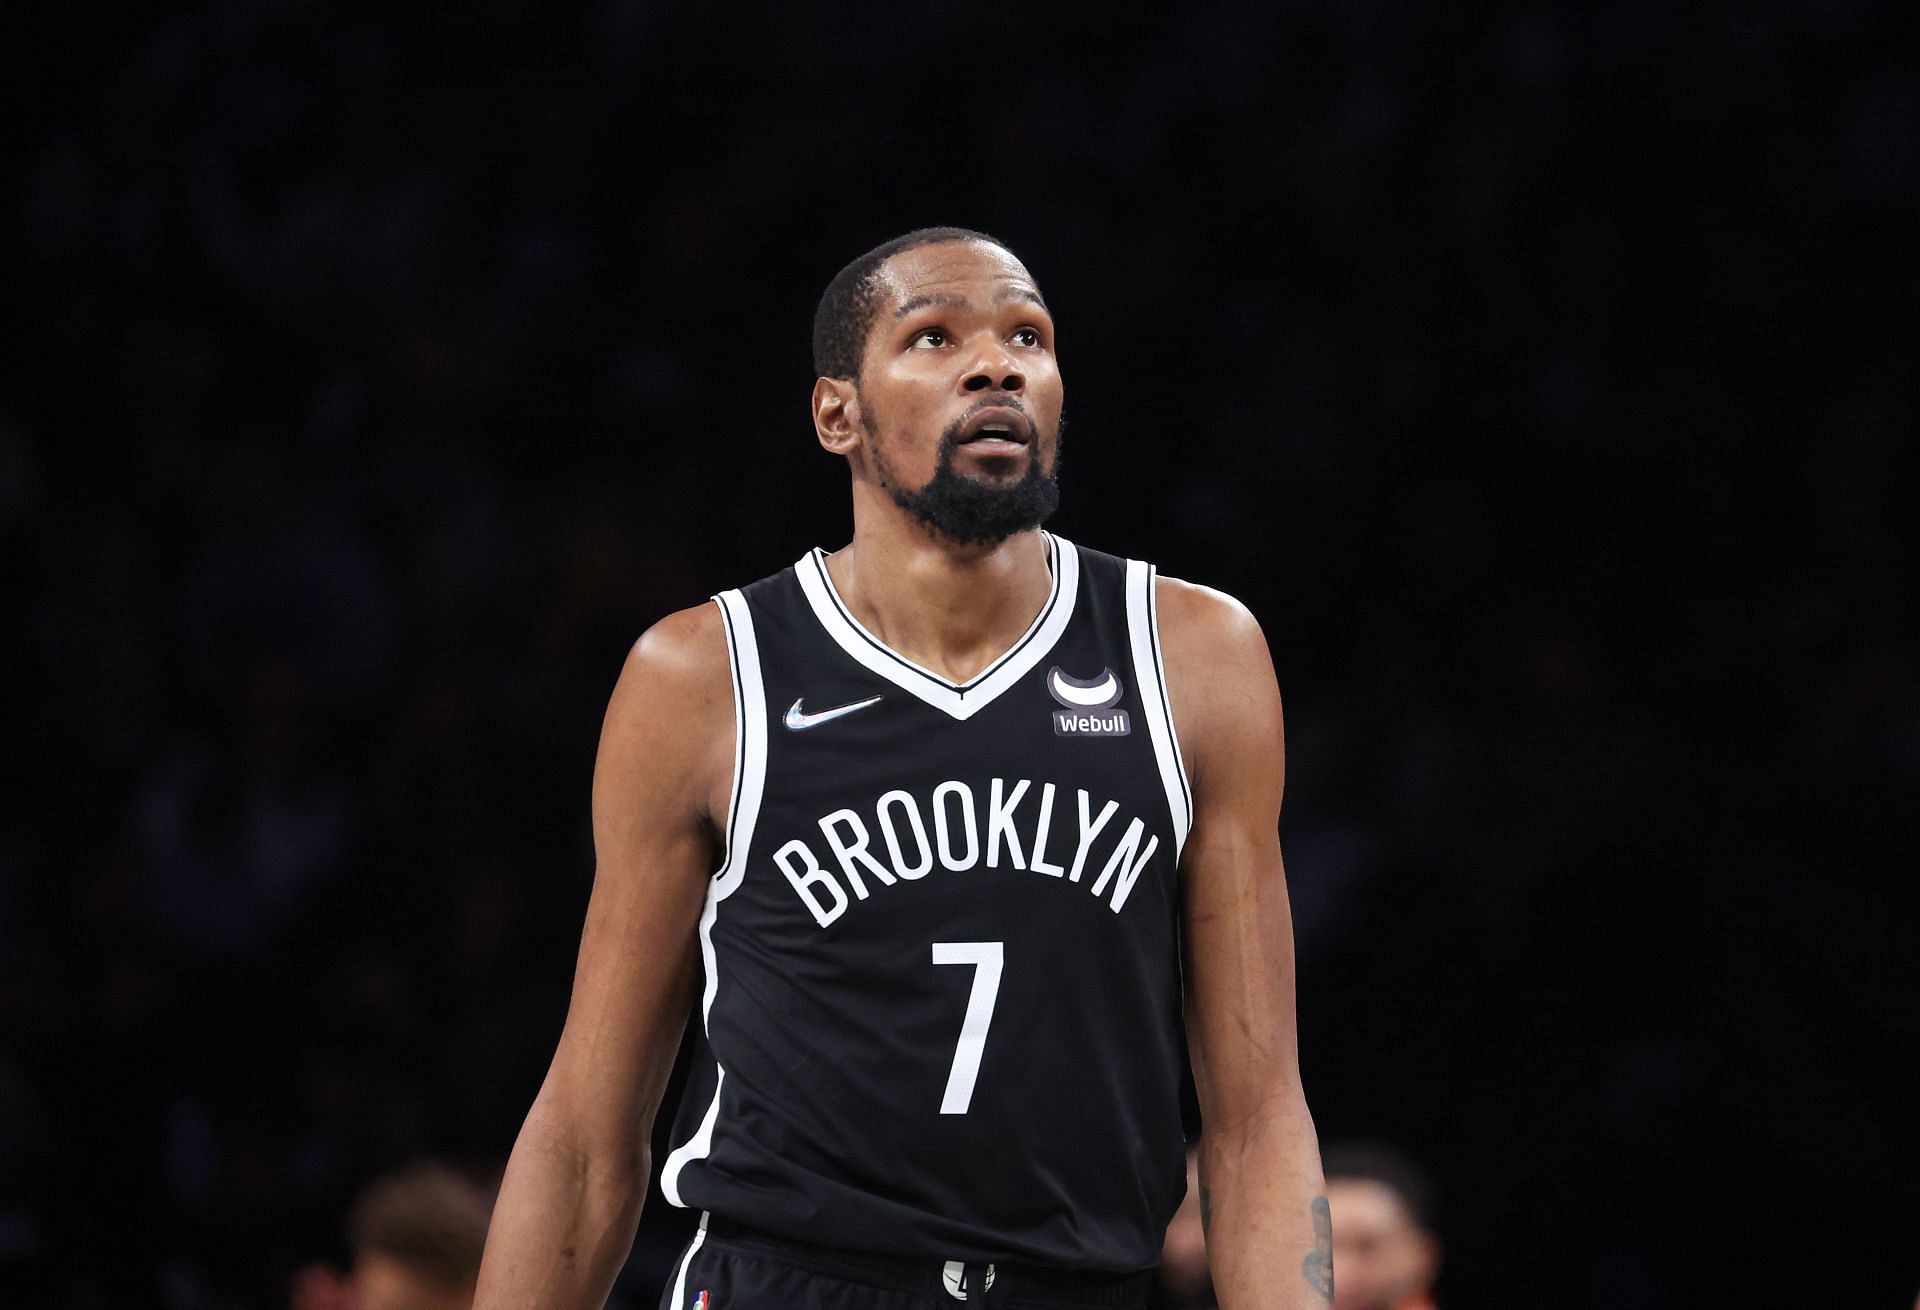 Kevin Durant #7 of the Brooklyn Nets looks on against the Boston Celtics during Game Three of the Eastern Conference First Round NBA Playoffs at Barclays Center on April 23, 2022 in New York City